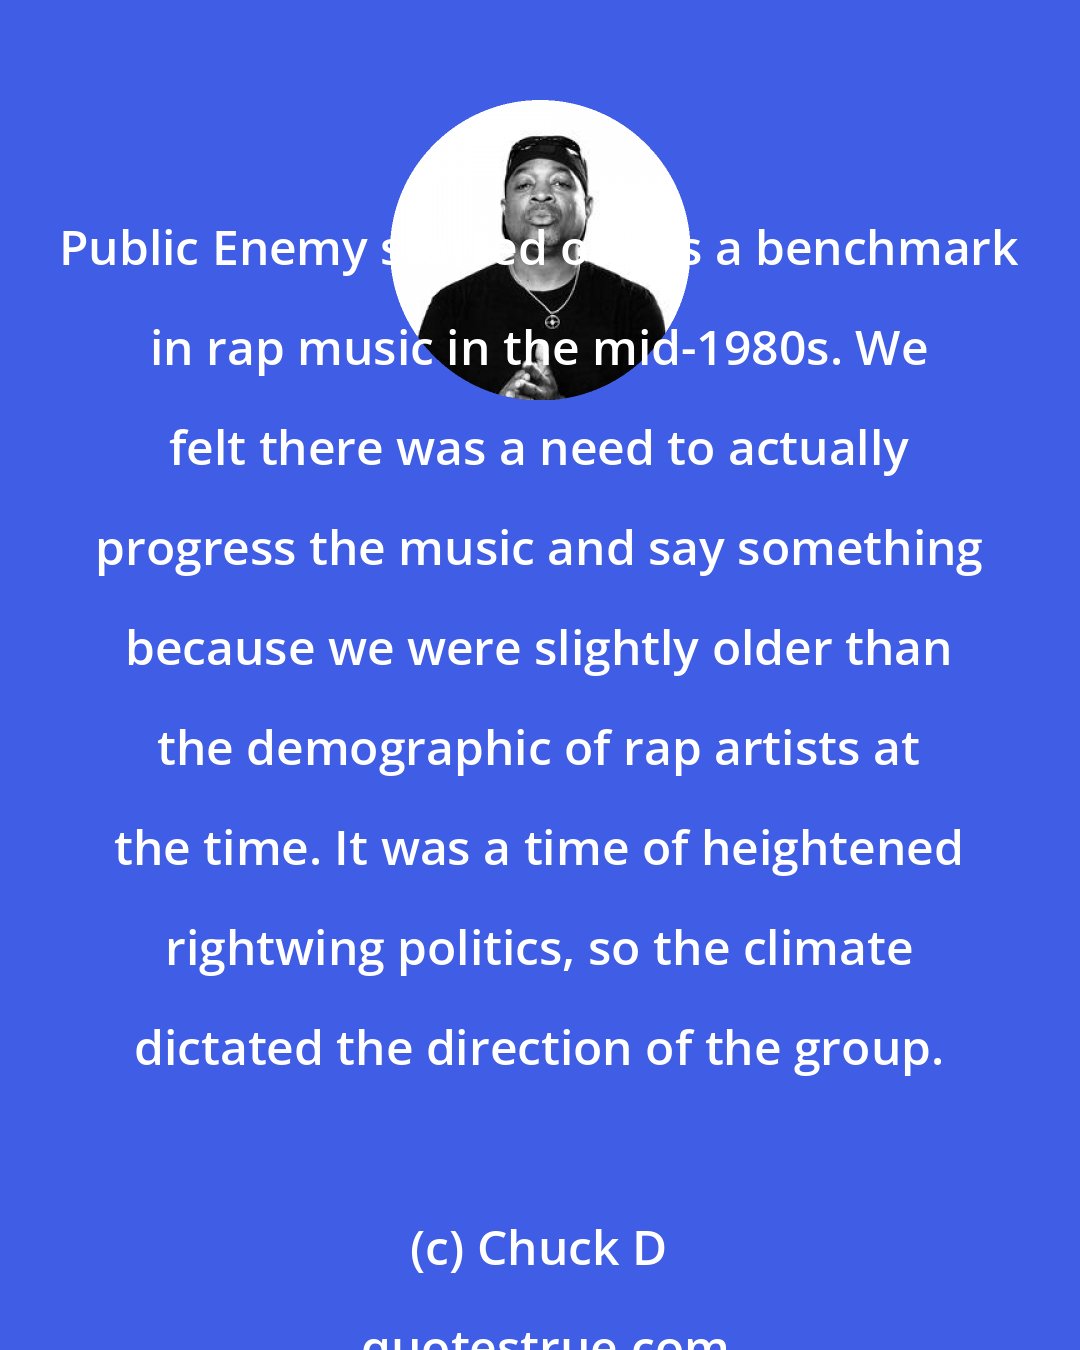 Chuck D: Public Enemy started out as a benchmark in rap music in the mid-1980s. We felt there was a need to actually progress the music and say something because we were slightly older than the demographic of rap artists at the time. It was a time of heightened rightwing politics, so the climate dictated the direction of the group.